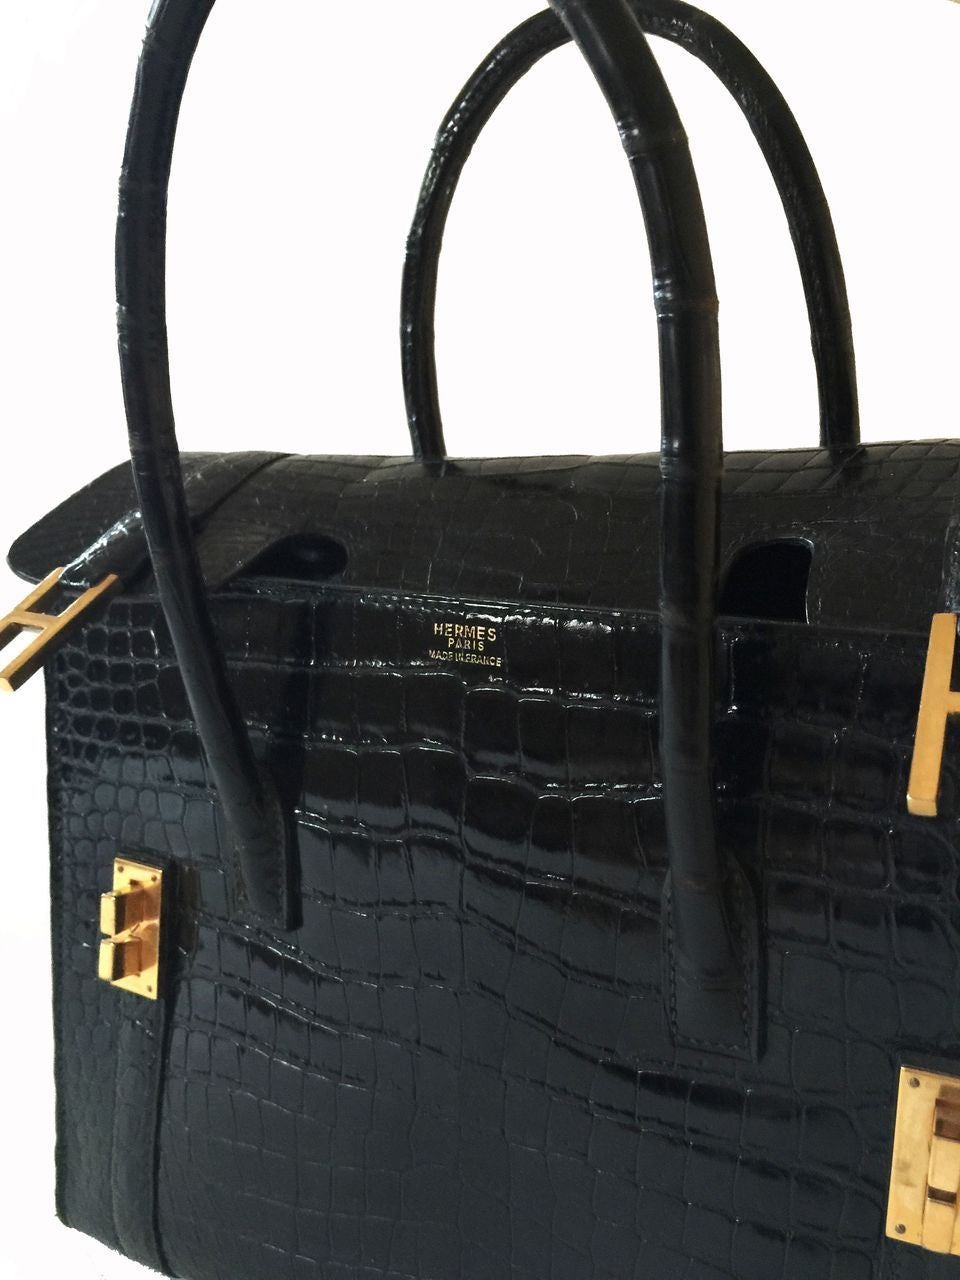 Gorgeous Hermès Drag Handbag in fabulous black crocodile leather. Gold hardware finishing, circa 1970. Marked: Hermès Paris Made in France. In excellent vintage condition. Size: 26 x 21 cm. Delivered with Cites and original dustbag. 

Save the